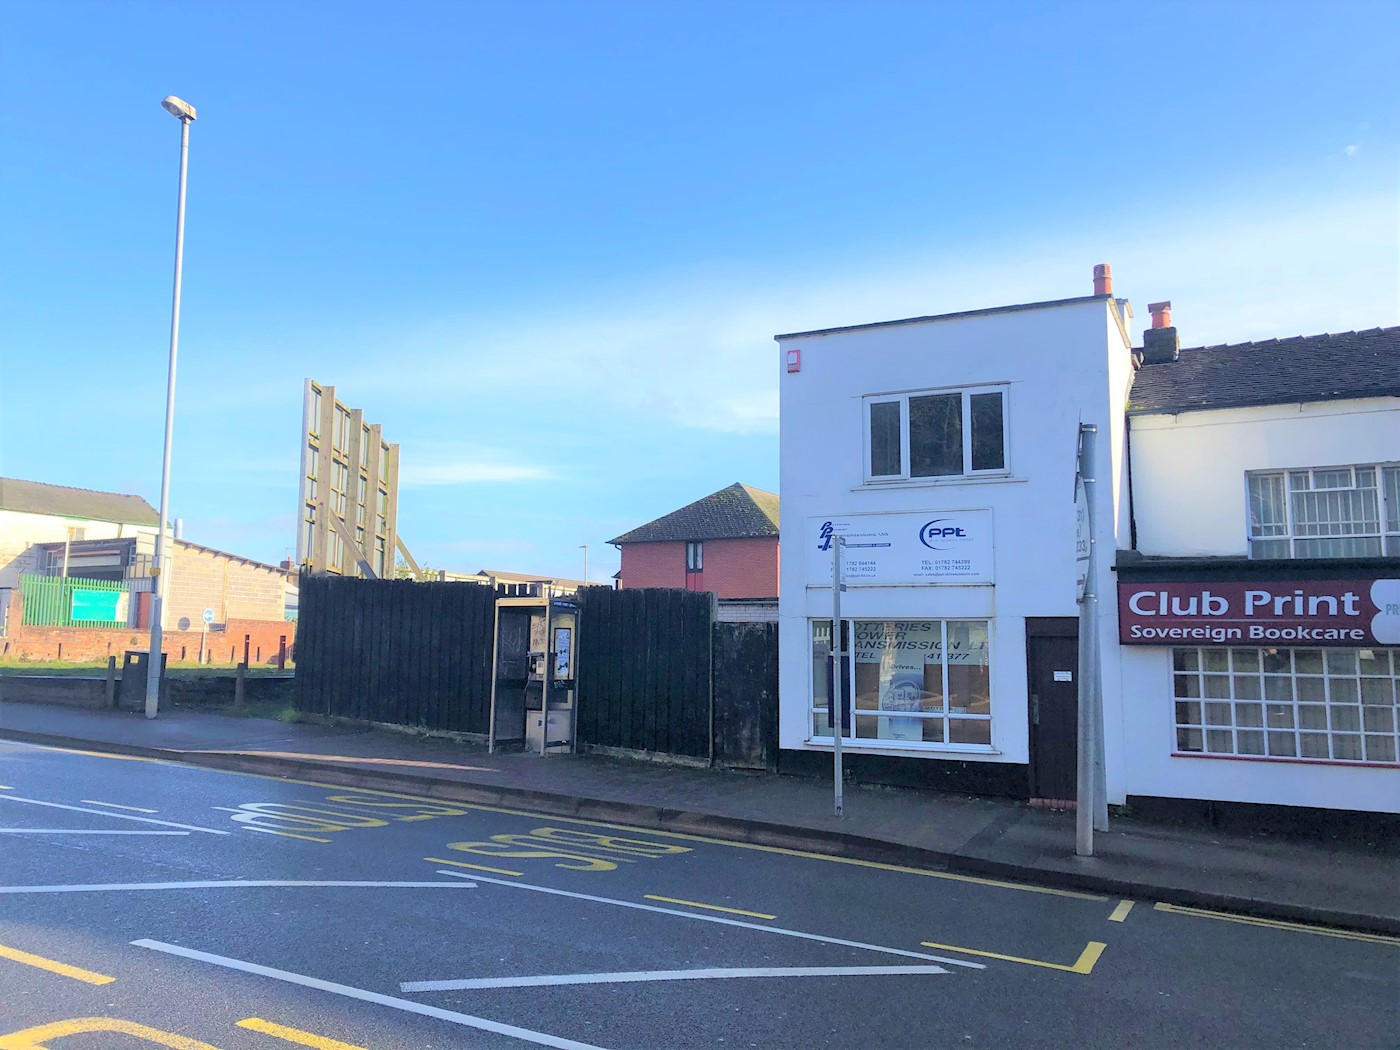 Land at Hartshill Road/Vale Street, Stoke on Trent, ST4 7QT 1/4